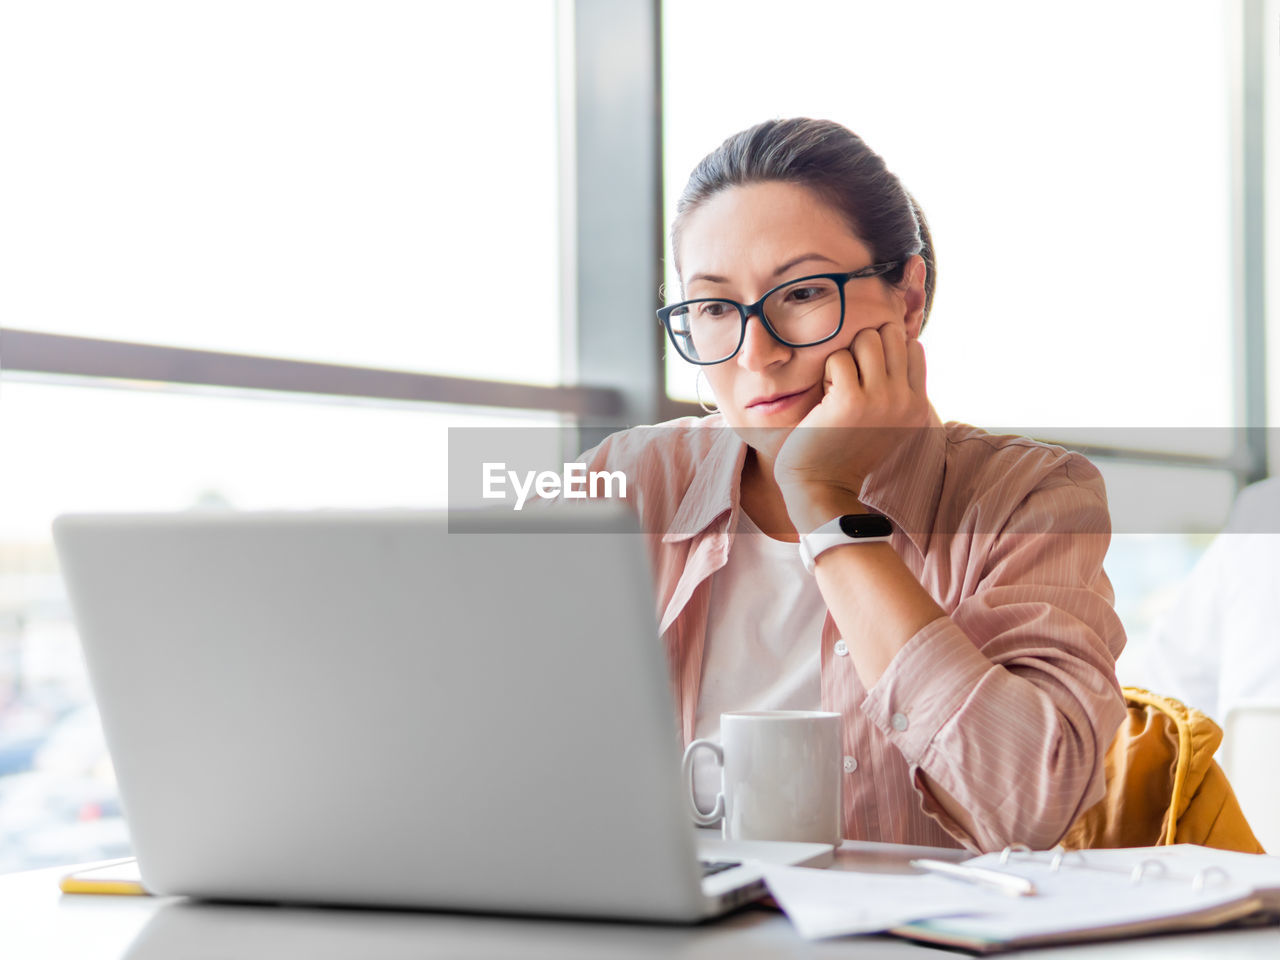 Frowned woman in eyeglasses works with laptop. co-working workplace for freelancers or students.